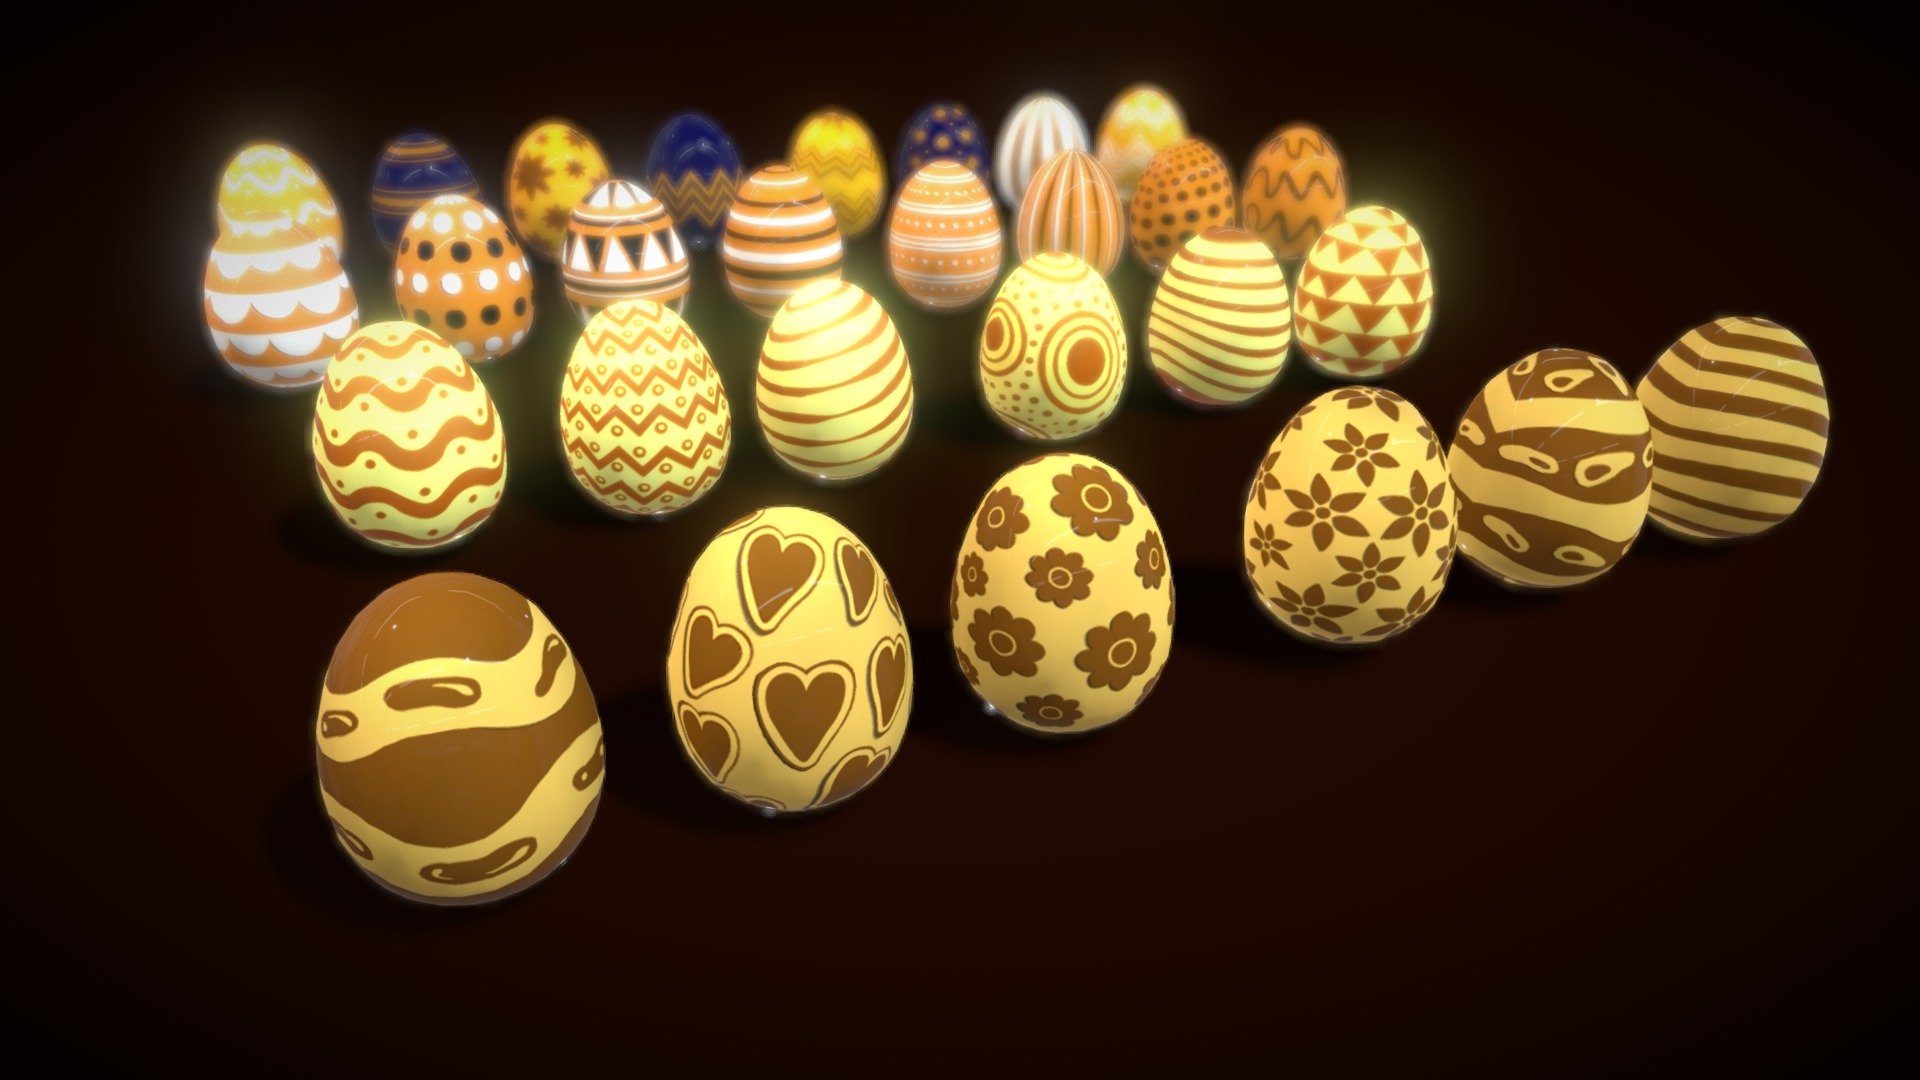 Get ready for Easter!

Collections Easter Eggs 7 model low-poly 3d model ready for Virtual Reality (VR), Augmented Reality (AR), games and other real-time apps. its ready for rendering and advertising too Features: 
- - 28 egg prefabs 
- - 4 Colections styles texture 
- - Polycount list : - Model 3D lowpoly Eggs ( 13248 polys/25152 Tris/12632 Verts) 
- - 4 Texture colections size 1024/1024 Please contact me if you have questions or need assistance with the models 3d model